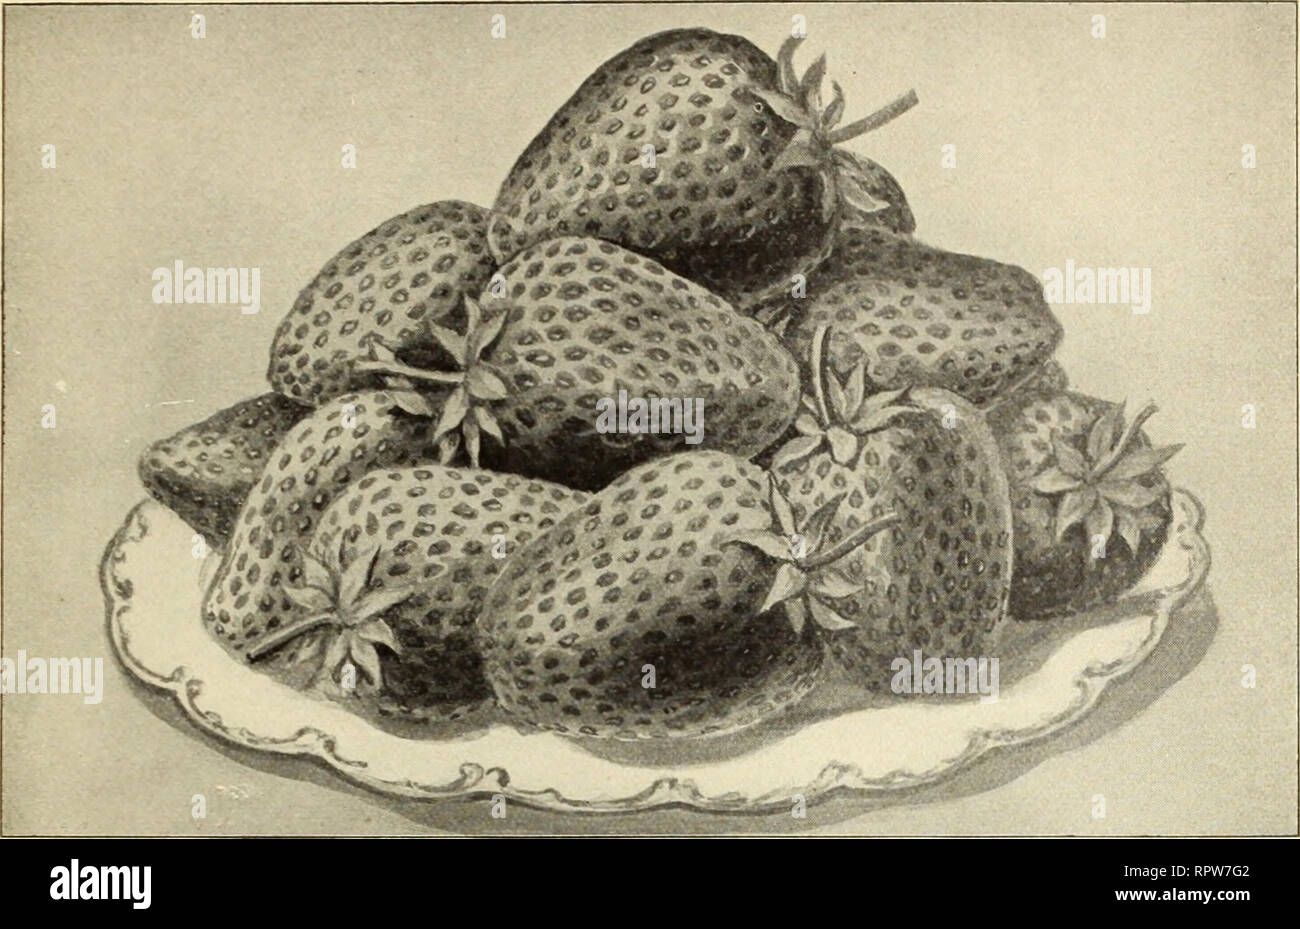 . Allen's catalogue 1912 : choicest strawberry plants and other small fruits. Nurseries (Horticulture) Maryland Salisbury Catalogs; Nursery stock Maryland Salisbury Catalogs; Strawberries Maryland Salisbury Catalogs. TRUE-TO-NAME STRAWBERRY PLANTS. The Lea will take a front rank among early market sorts LEA. We offered this berry for the first time in our 1910 Catalogue, and it has made good. As soon - as enough plants can be produced to put it in the hands of the average commercial grower, it' will take a front rank among the early market sorts. This is an entirely different type of berry fro Stock Photo